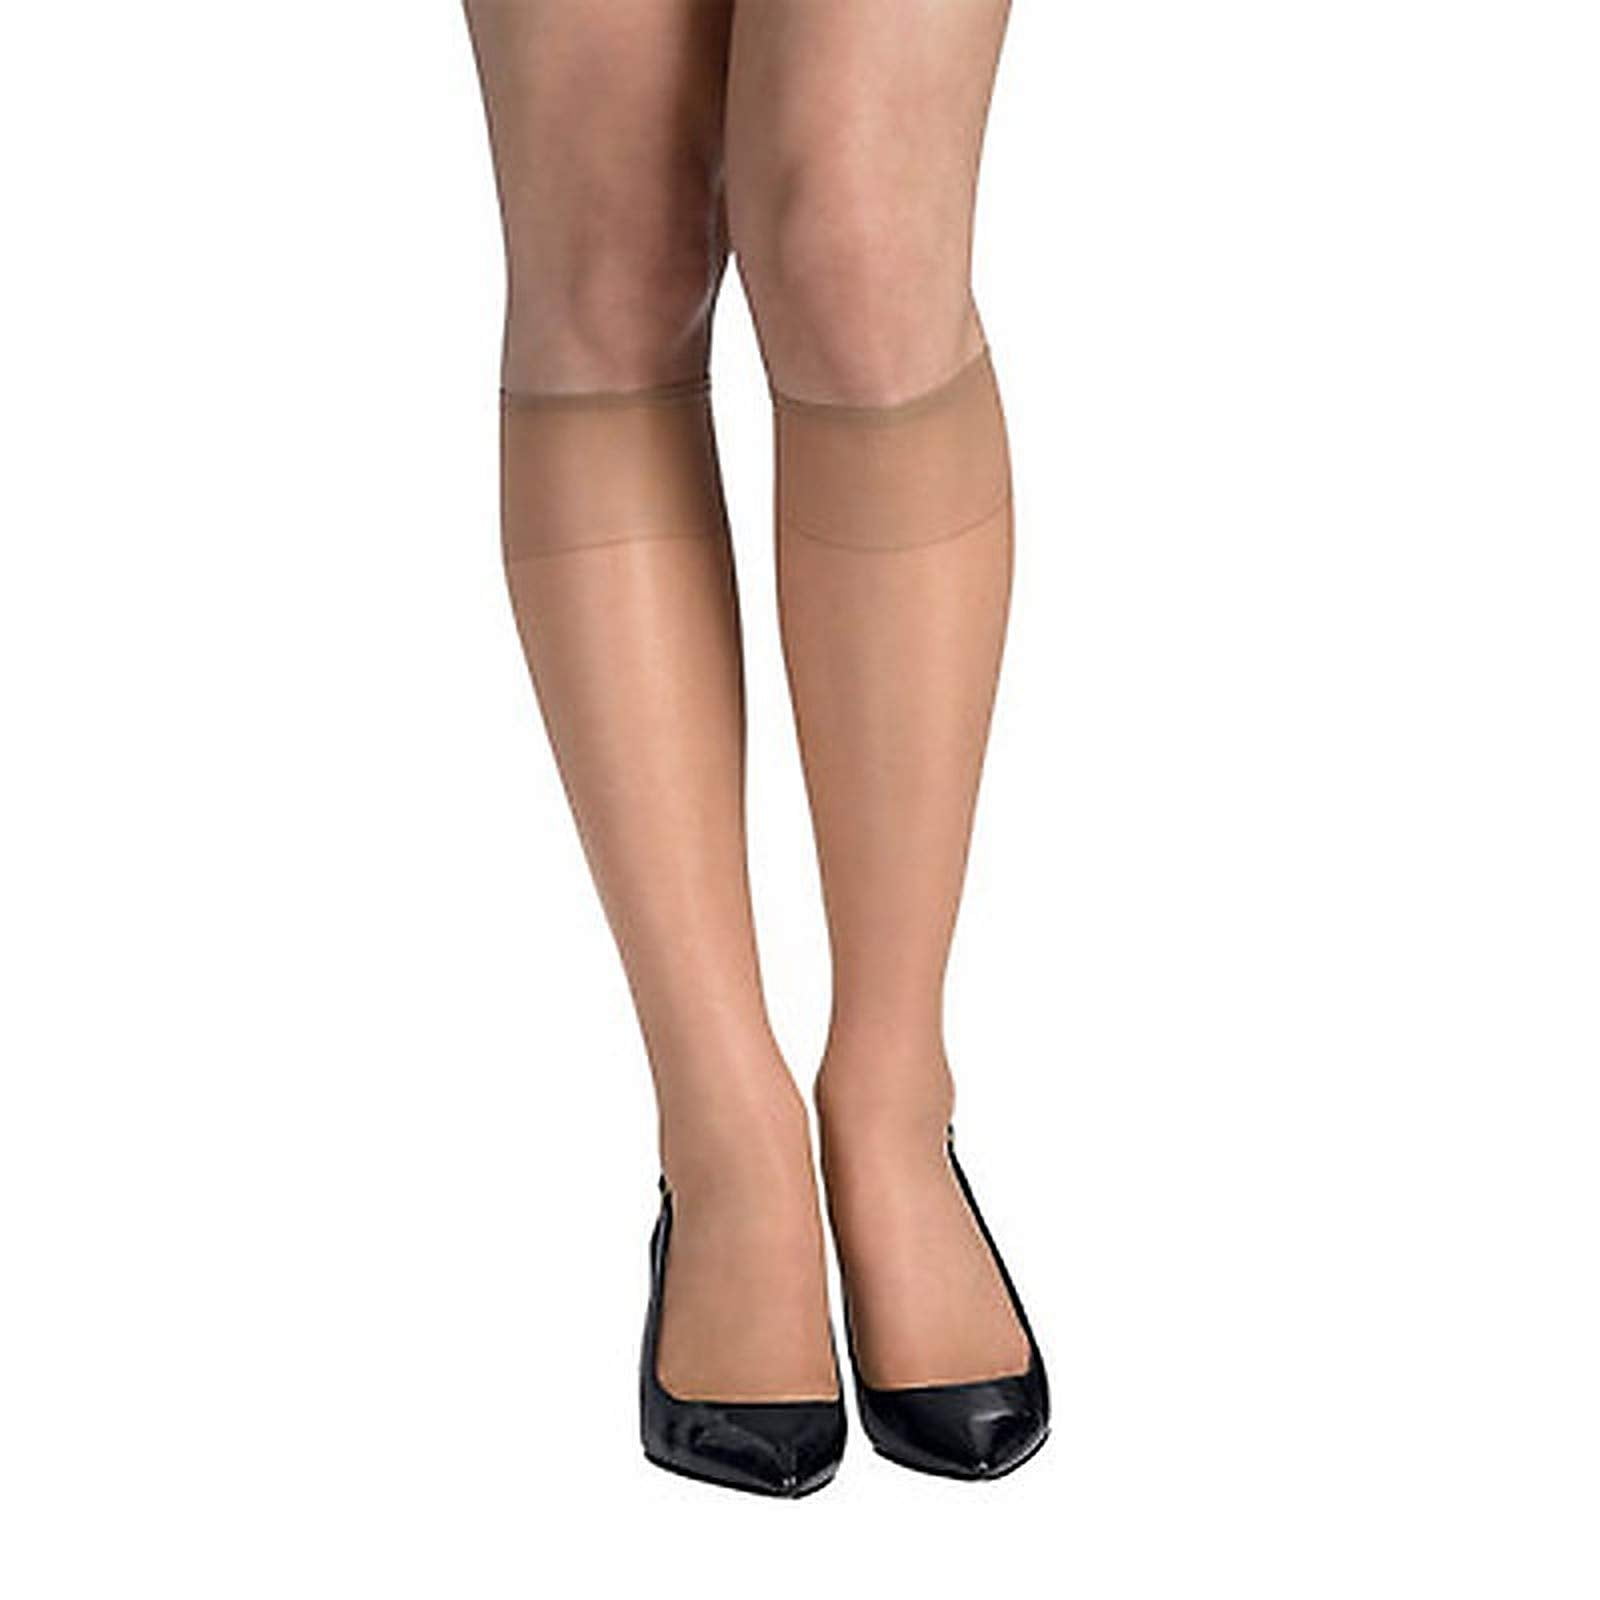 Hanes Womens Silk Reflections Silky Sheer Knee Highs With Reinforced Toe 2 Pack00775 Little